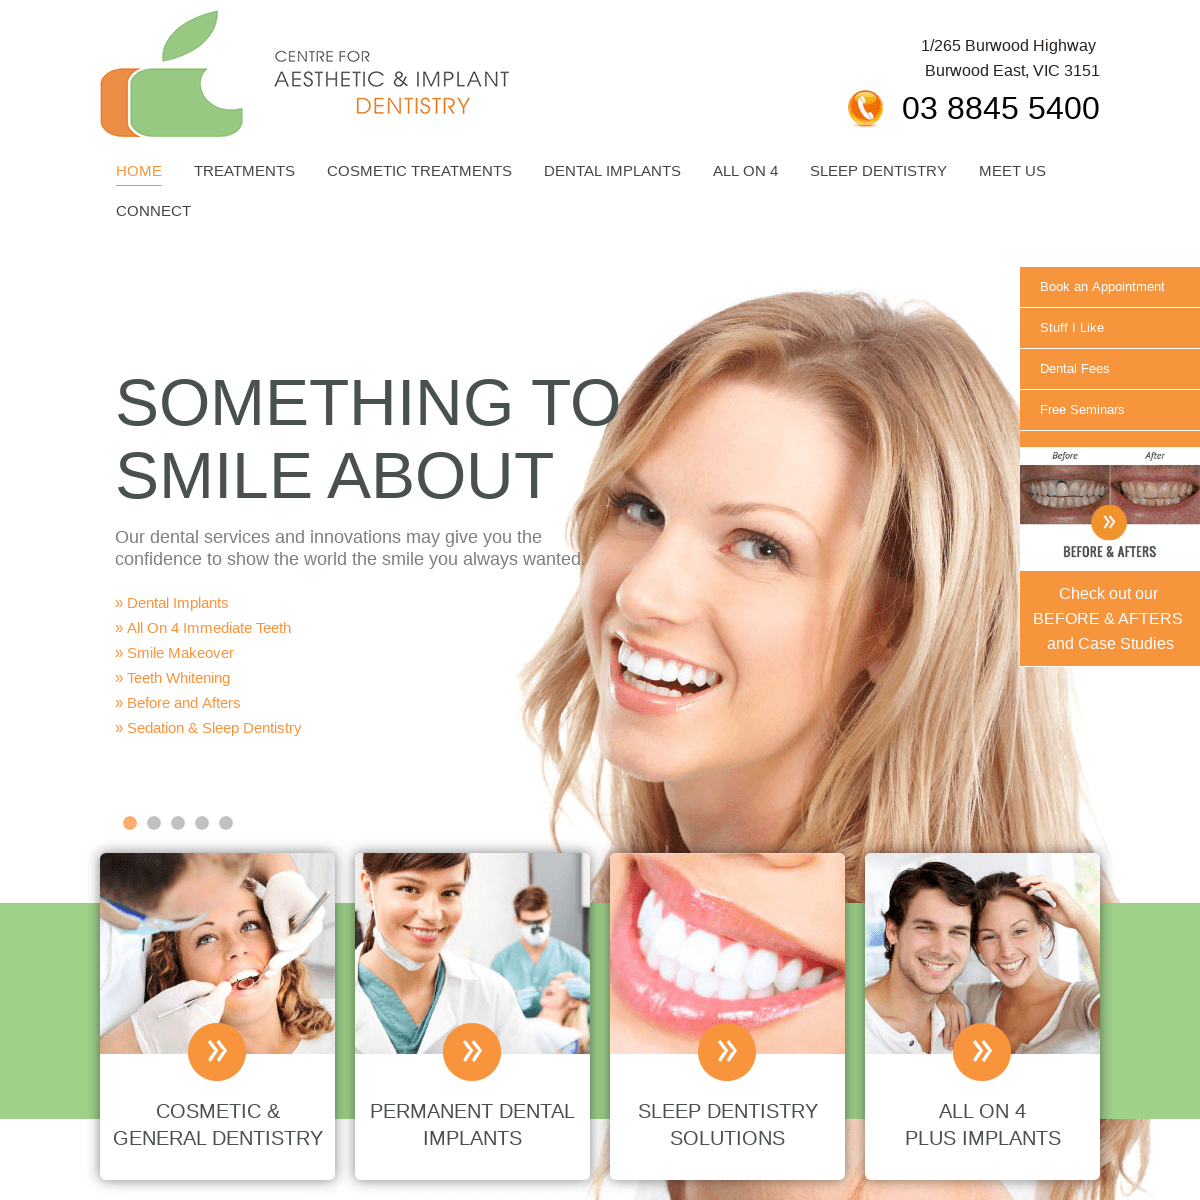 Centre For Aesthetic & Implant Dentistry | Centre For Aesthetic & Implant Dentistry